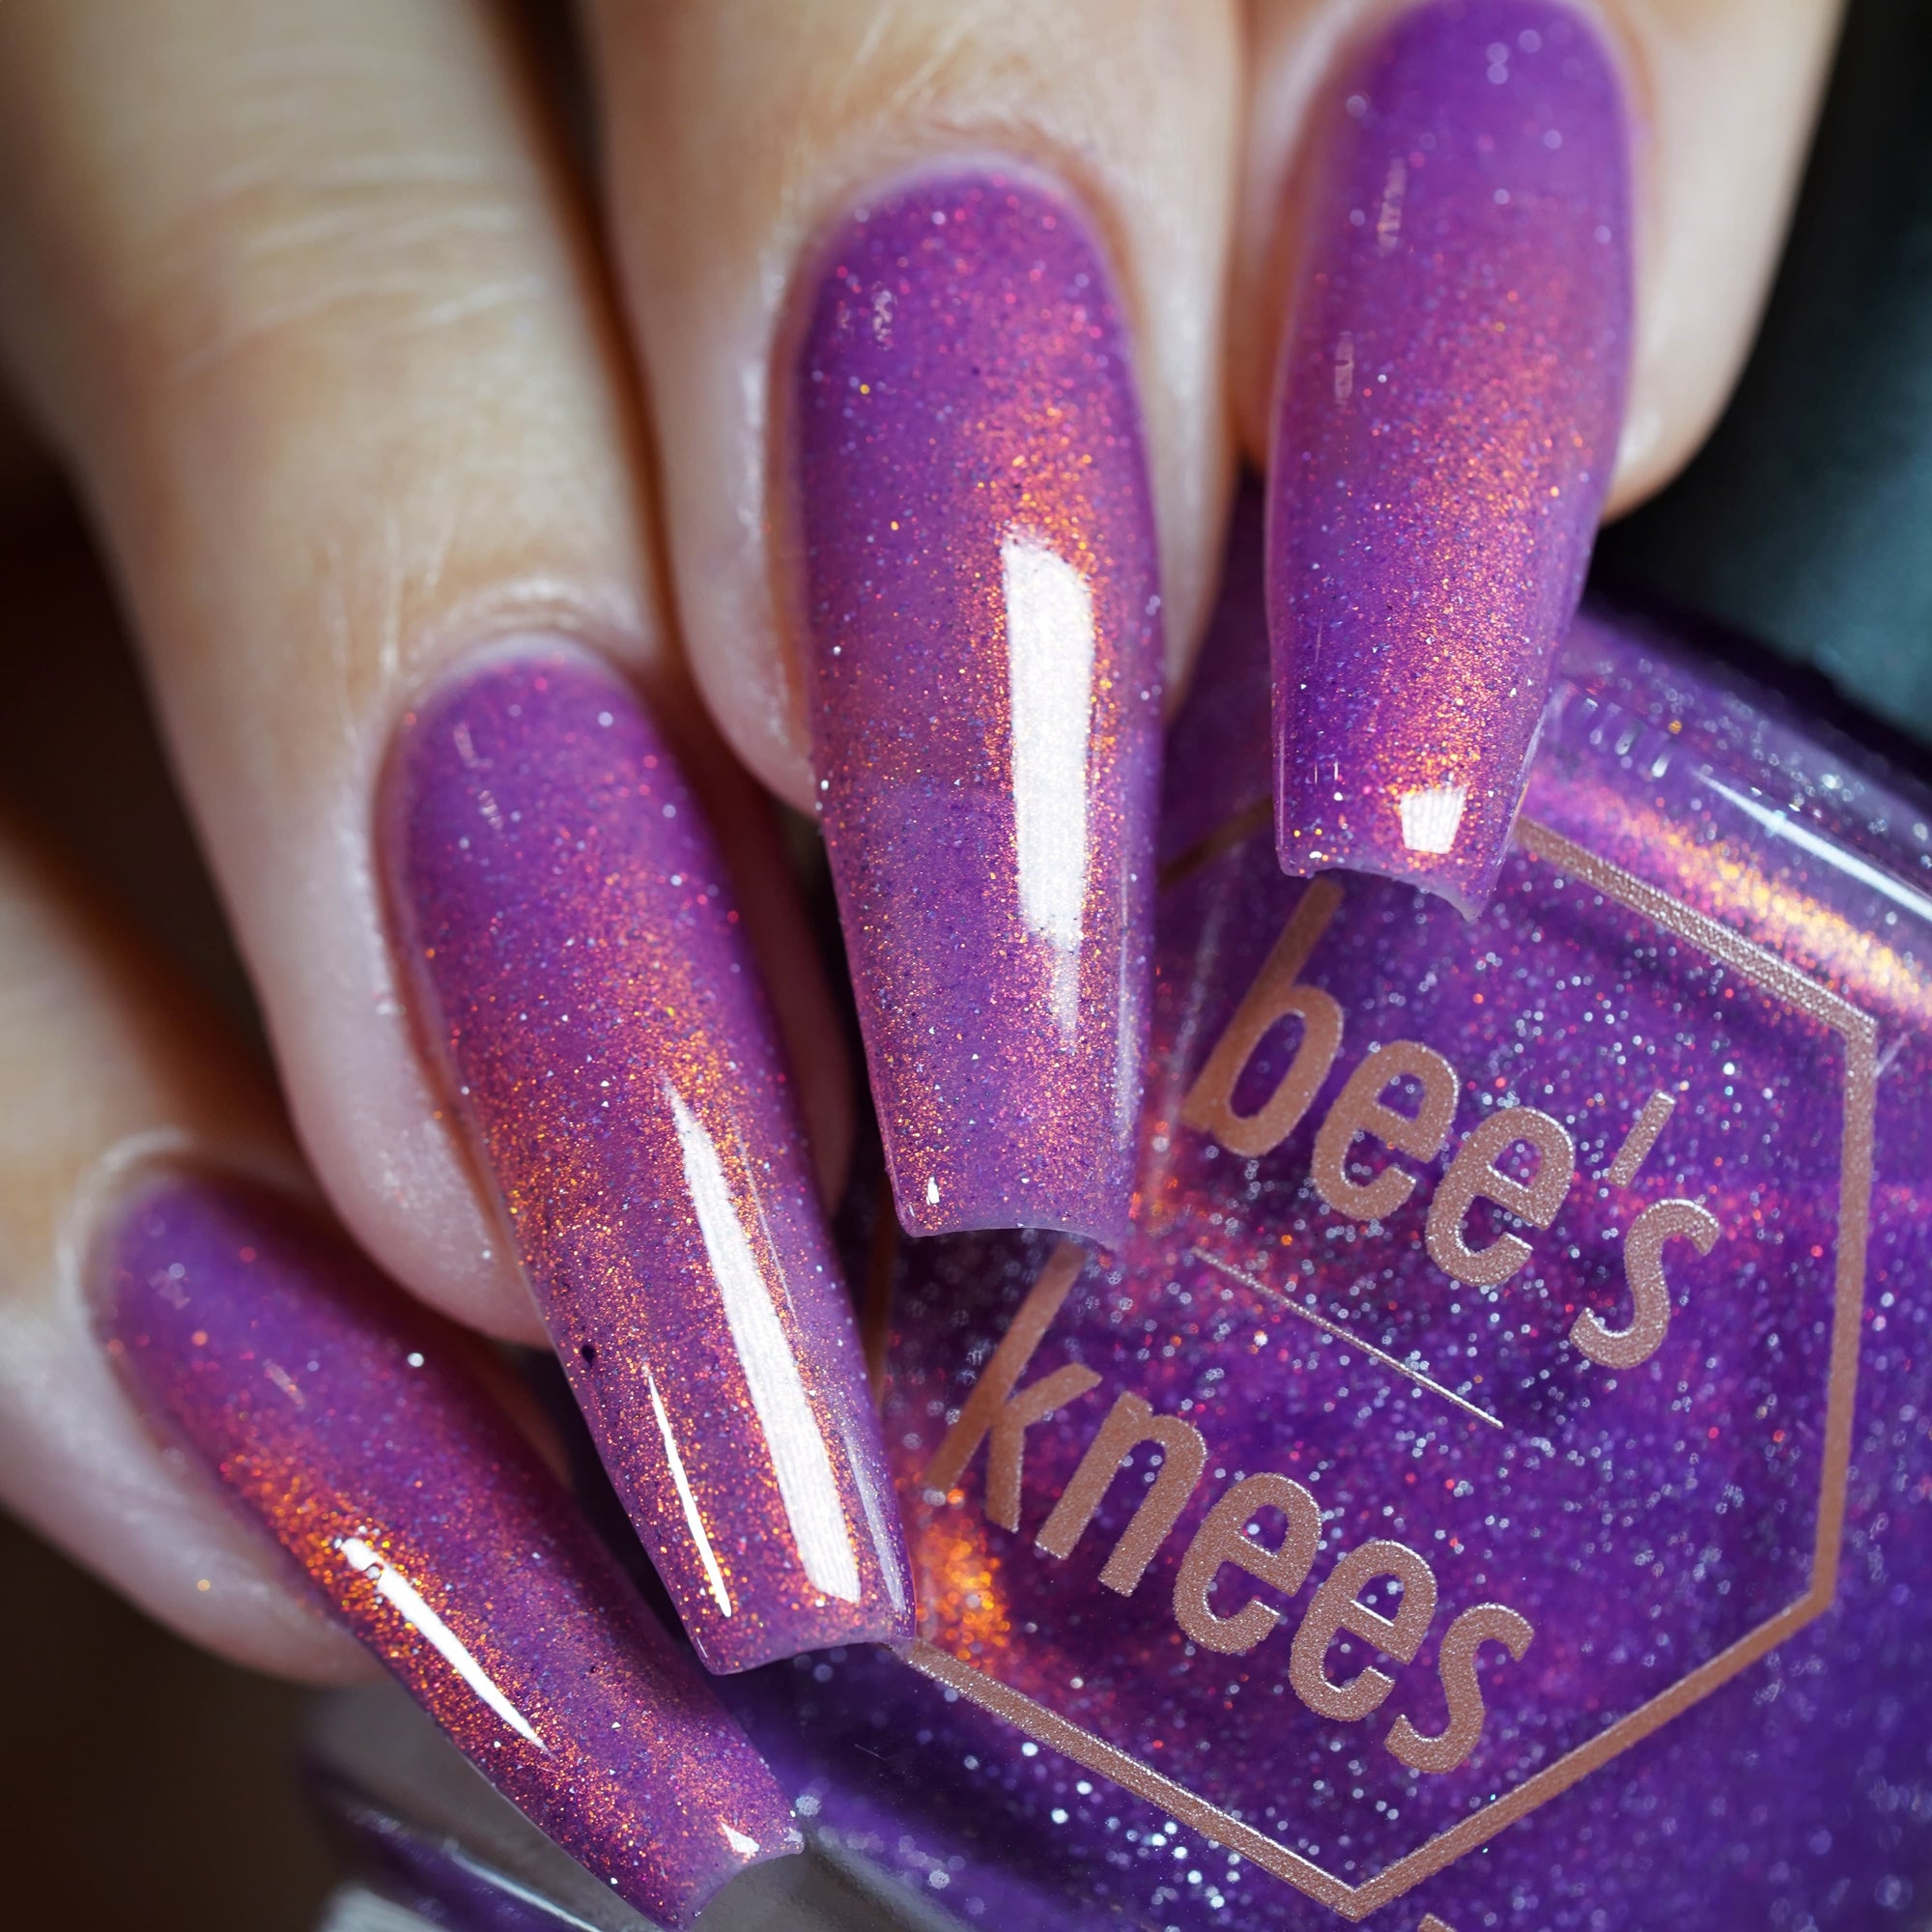 *PRE-ORDER* Bee's Knees Lacquer - I'm Sick And Tired Of People Using Girl As An Insult